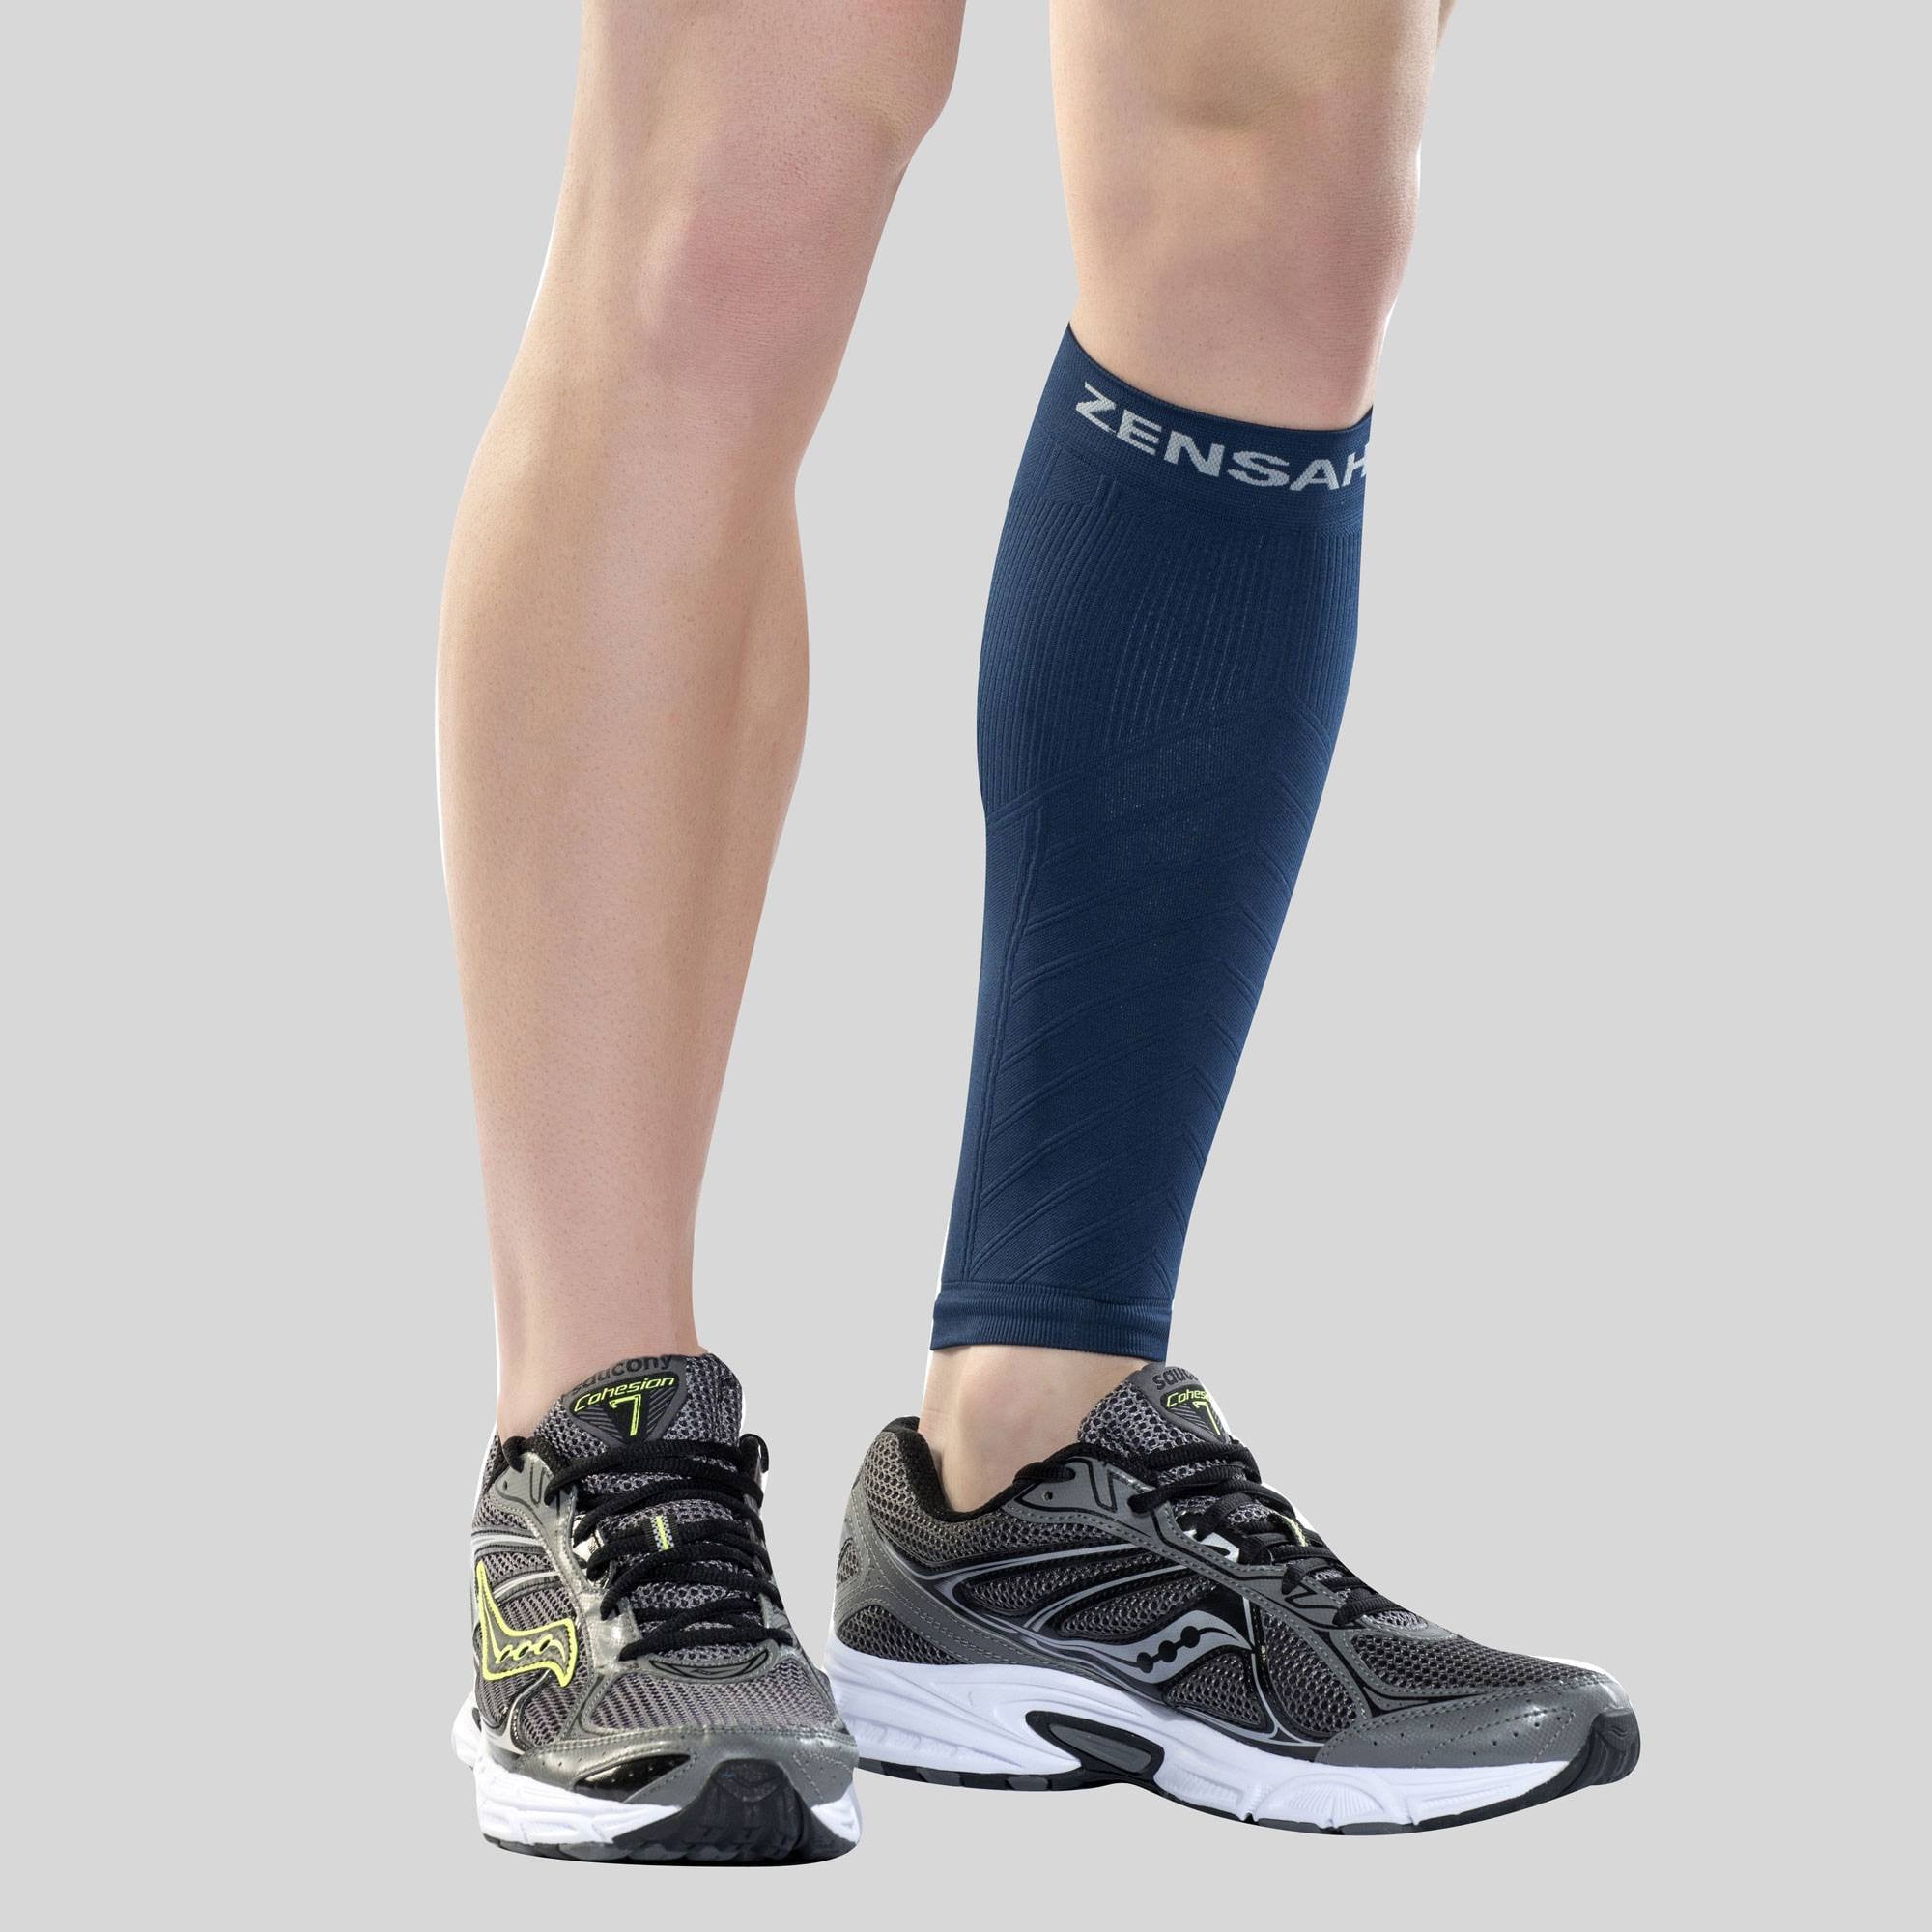 1Pair Compression Calf Sleeves Leg Compression Sock Running